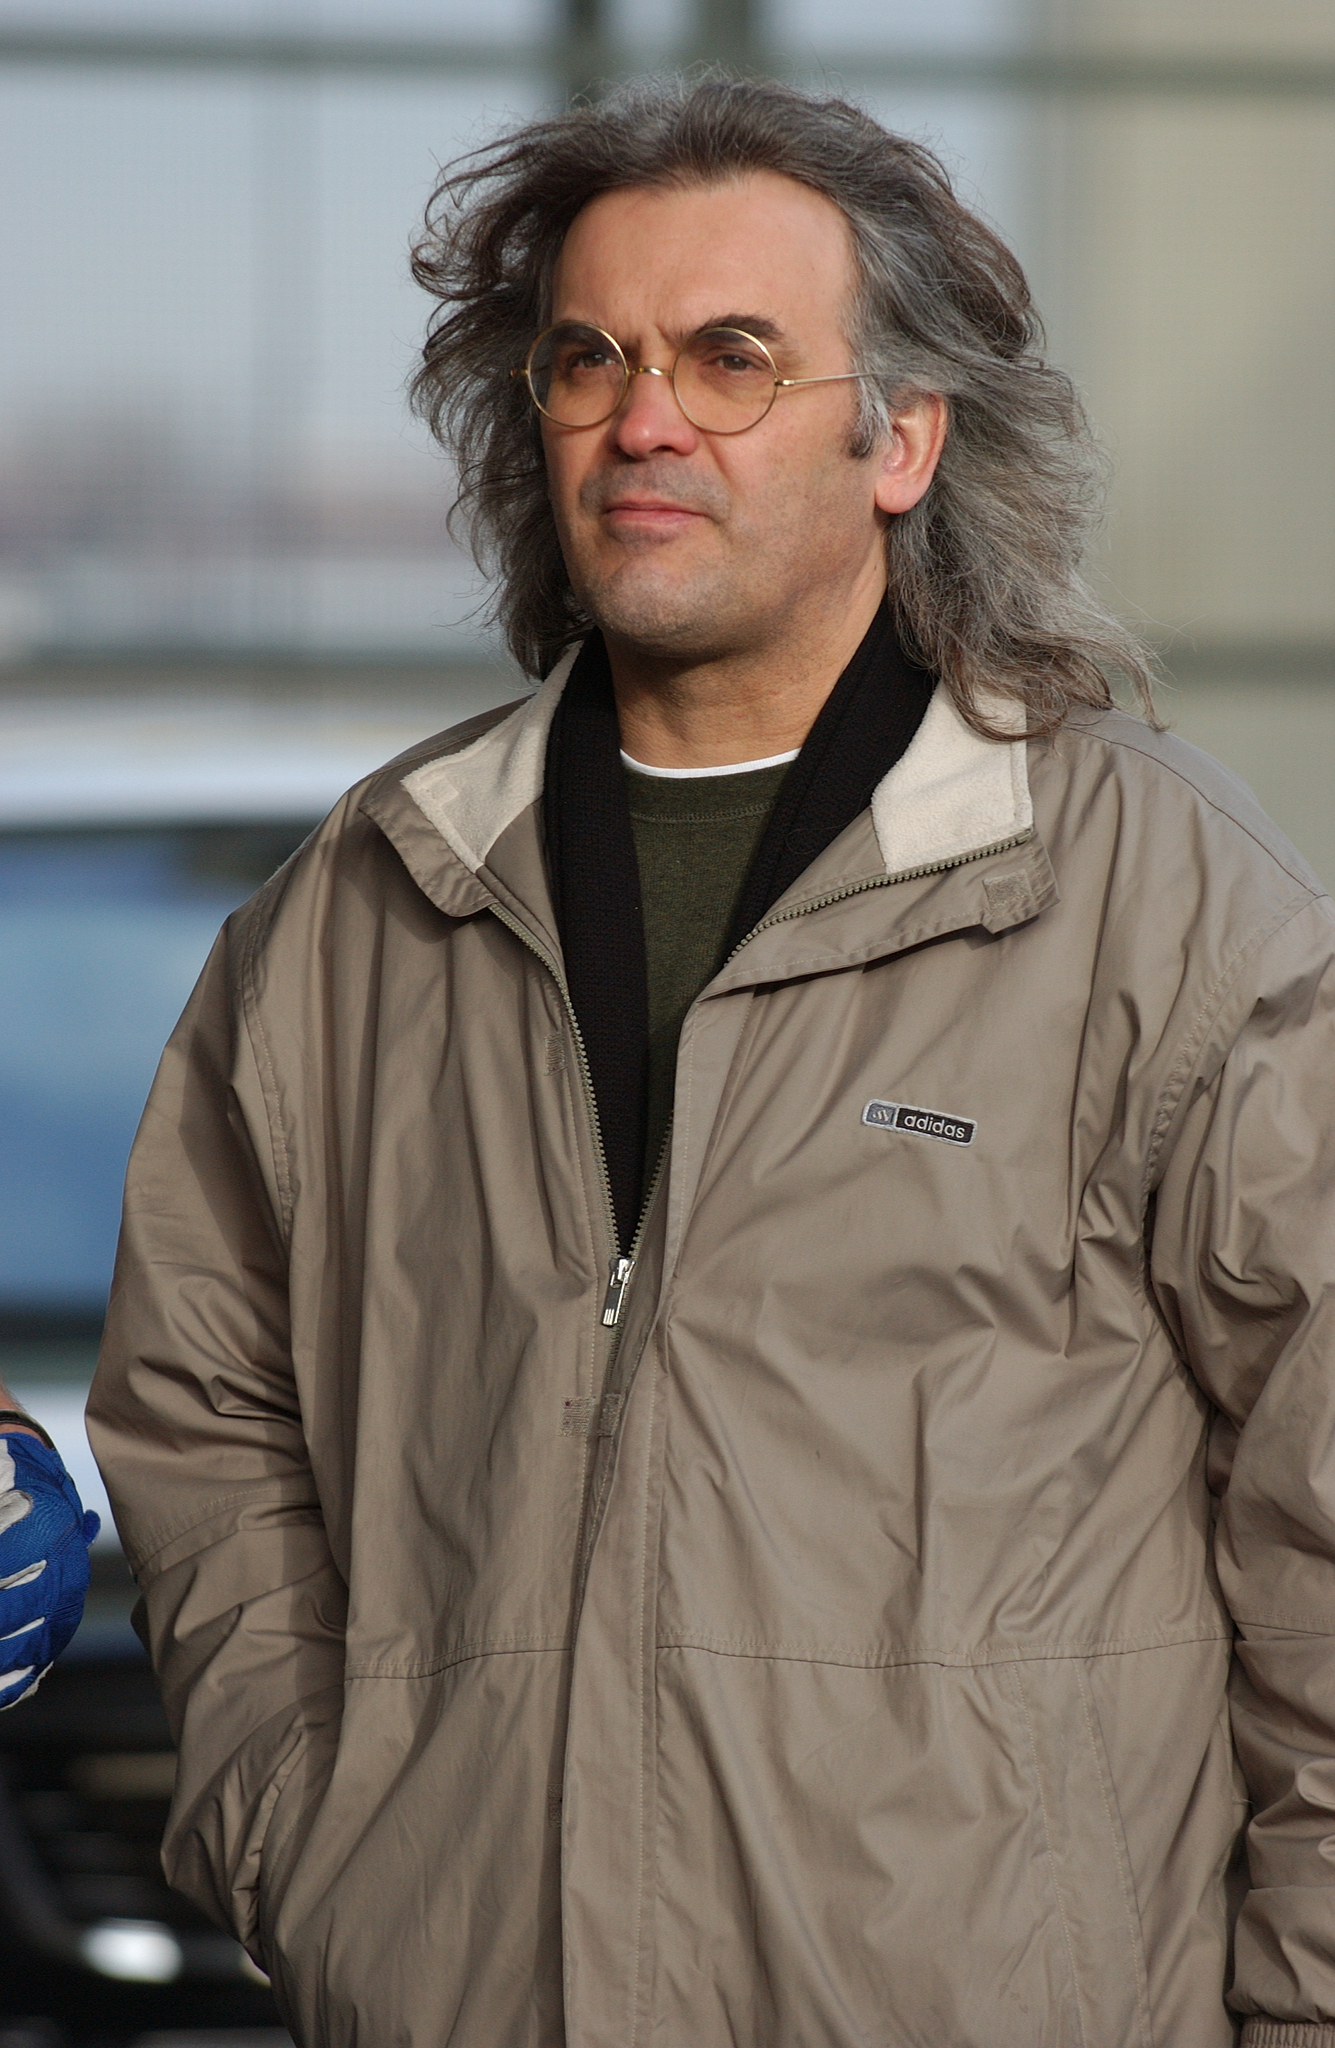 Still of Paul Greengrass in The Bourne Supremacy (2004)